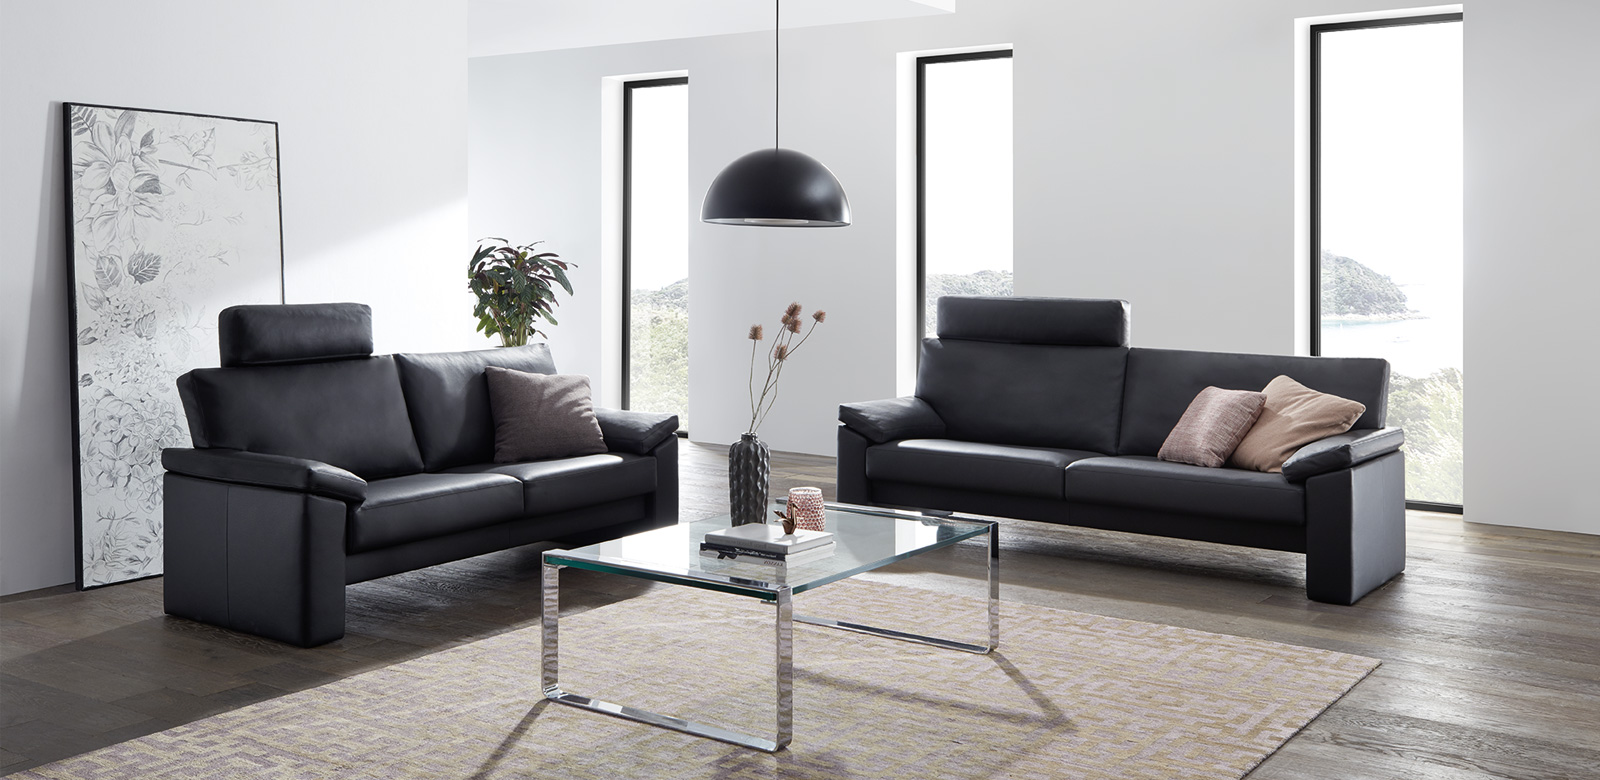 With its very modern look, this model combines our principle of Comfort® with an appealingly clear design language. Monaco flexibly adapts to your personal seating habits and preferences - and at the same time is a luxurious eye-catcher in your living ambience.